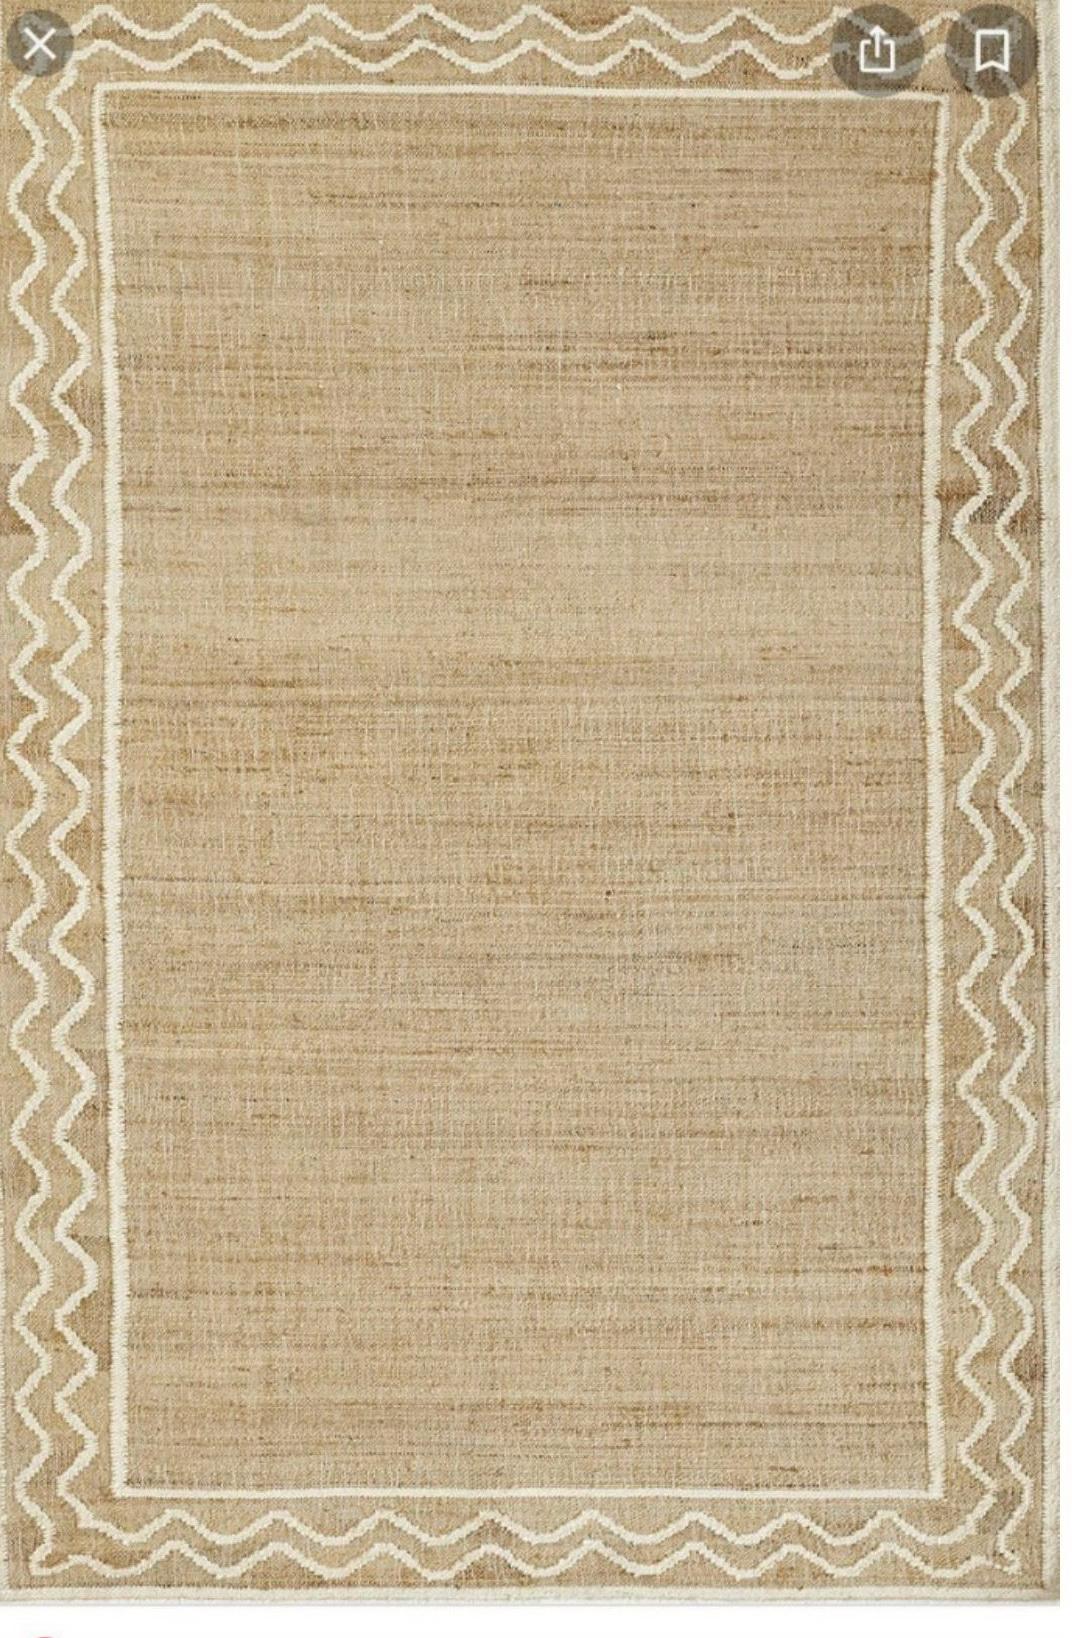 Handmade Jute Area Flat Weave Rug, 4x6 Jute And White Bordered Indian Dhurrie In New Condition For Sale In Jaipur, IN